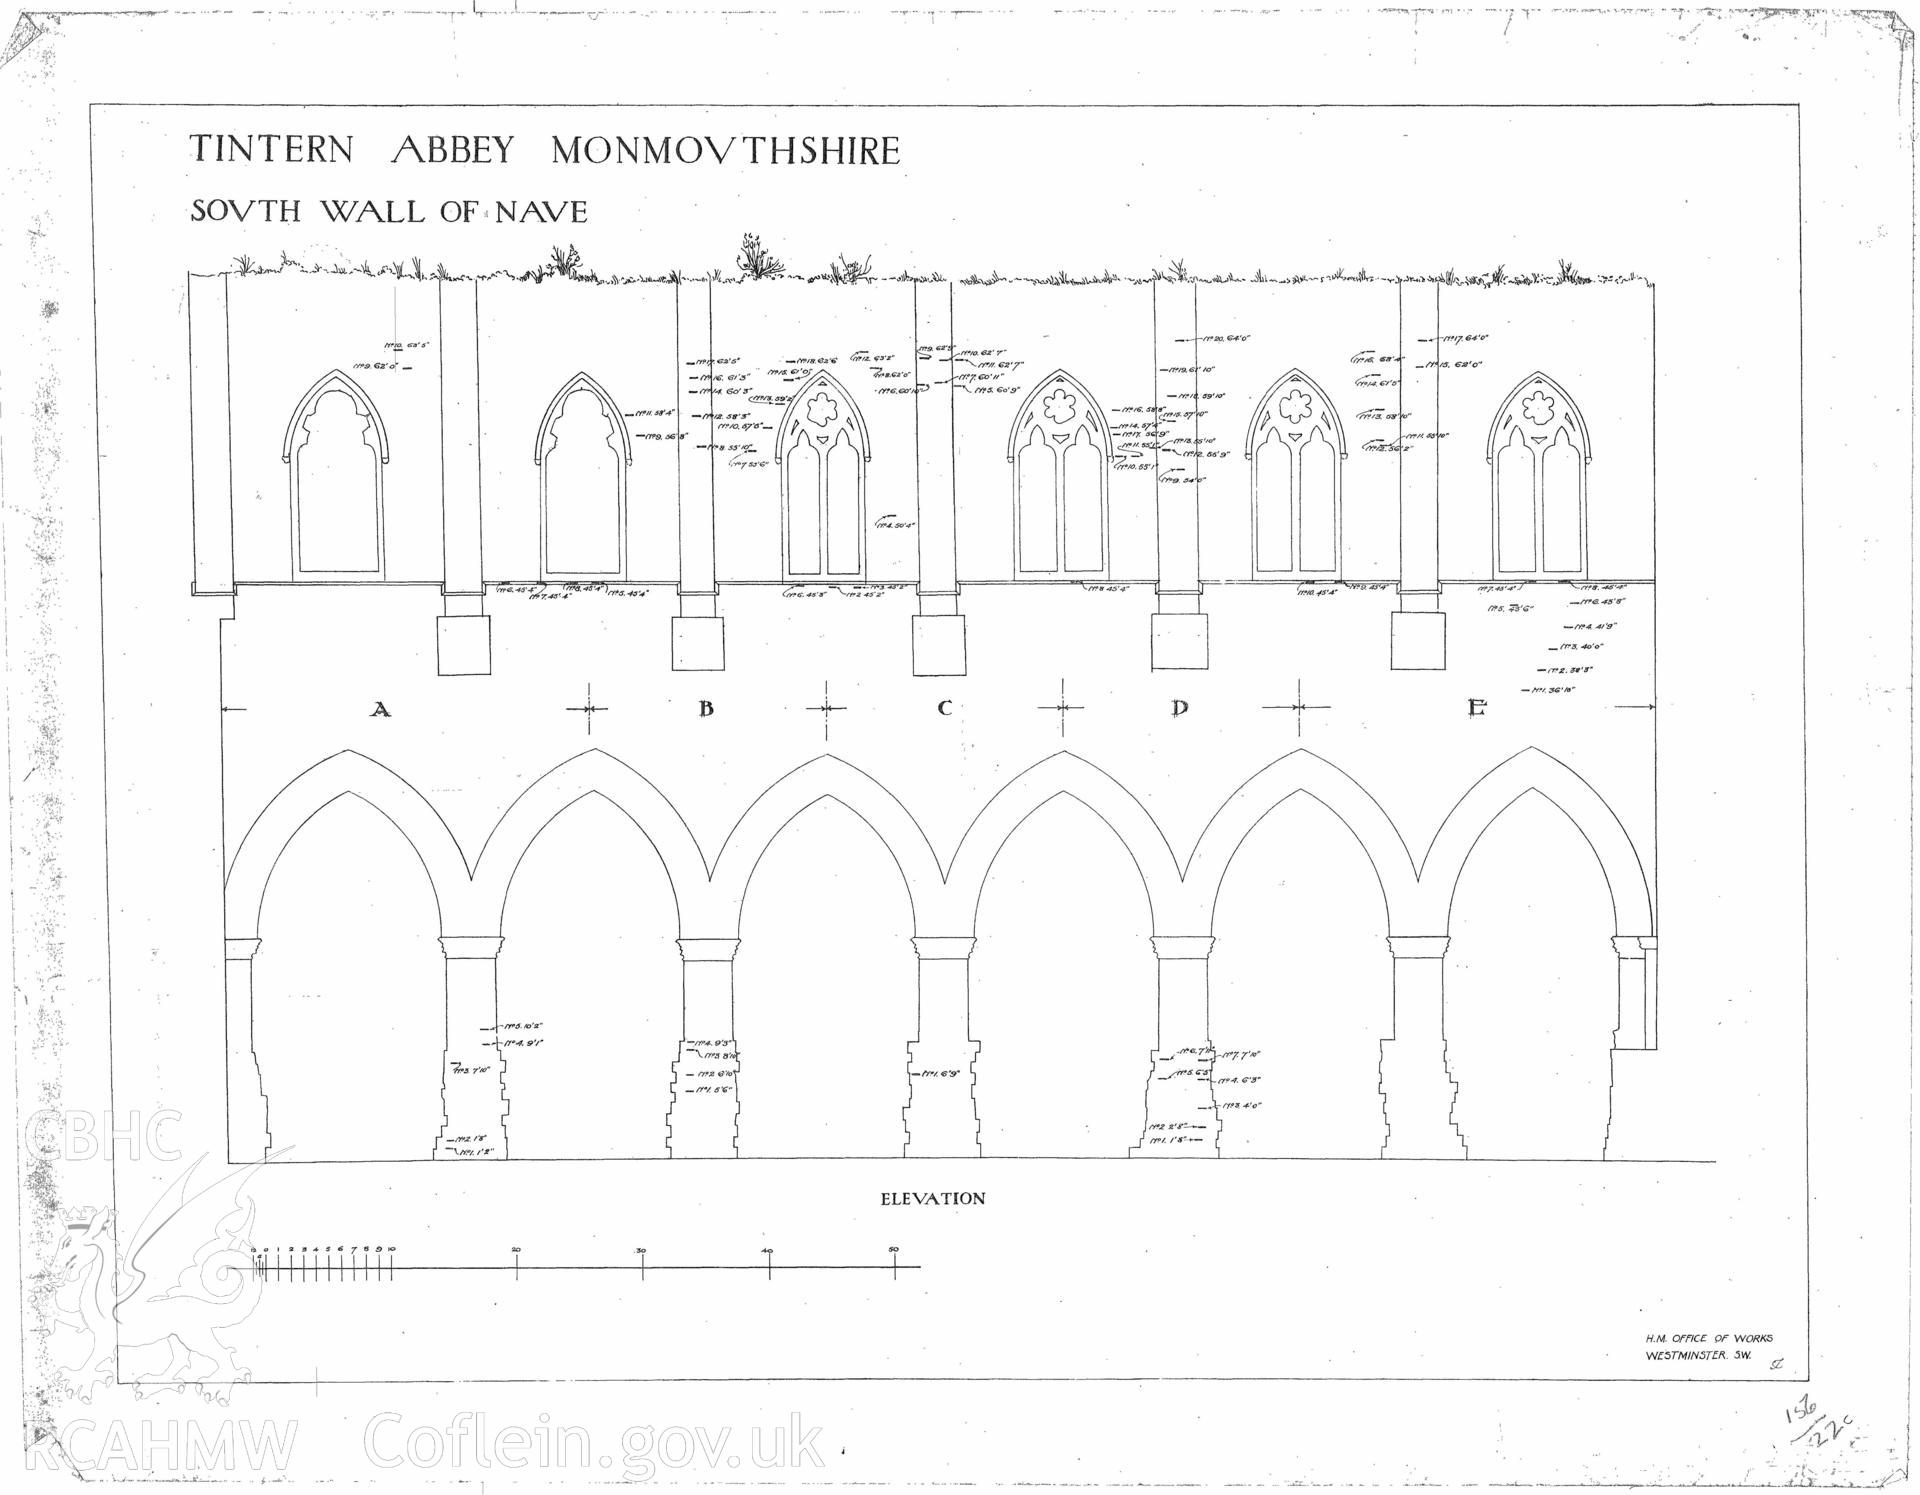 Cadw guardianship monument drawing of Tintern Abbey. Elevations A-E S Wall of Nave. Cadw ref. No. 156/22c. Scale 1:50.